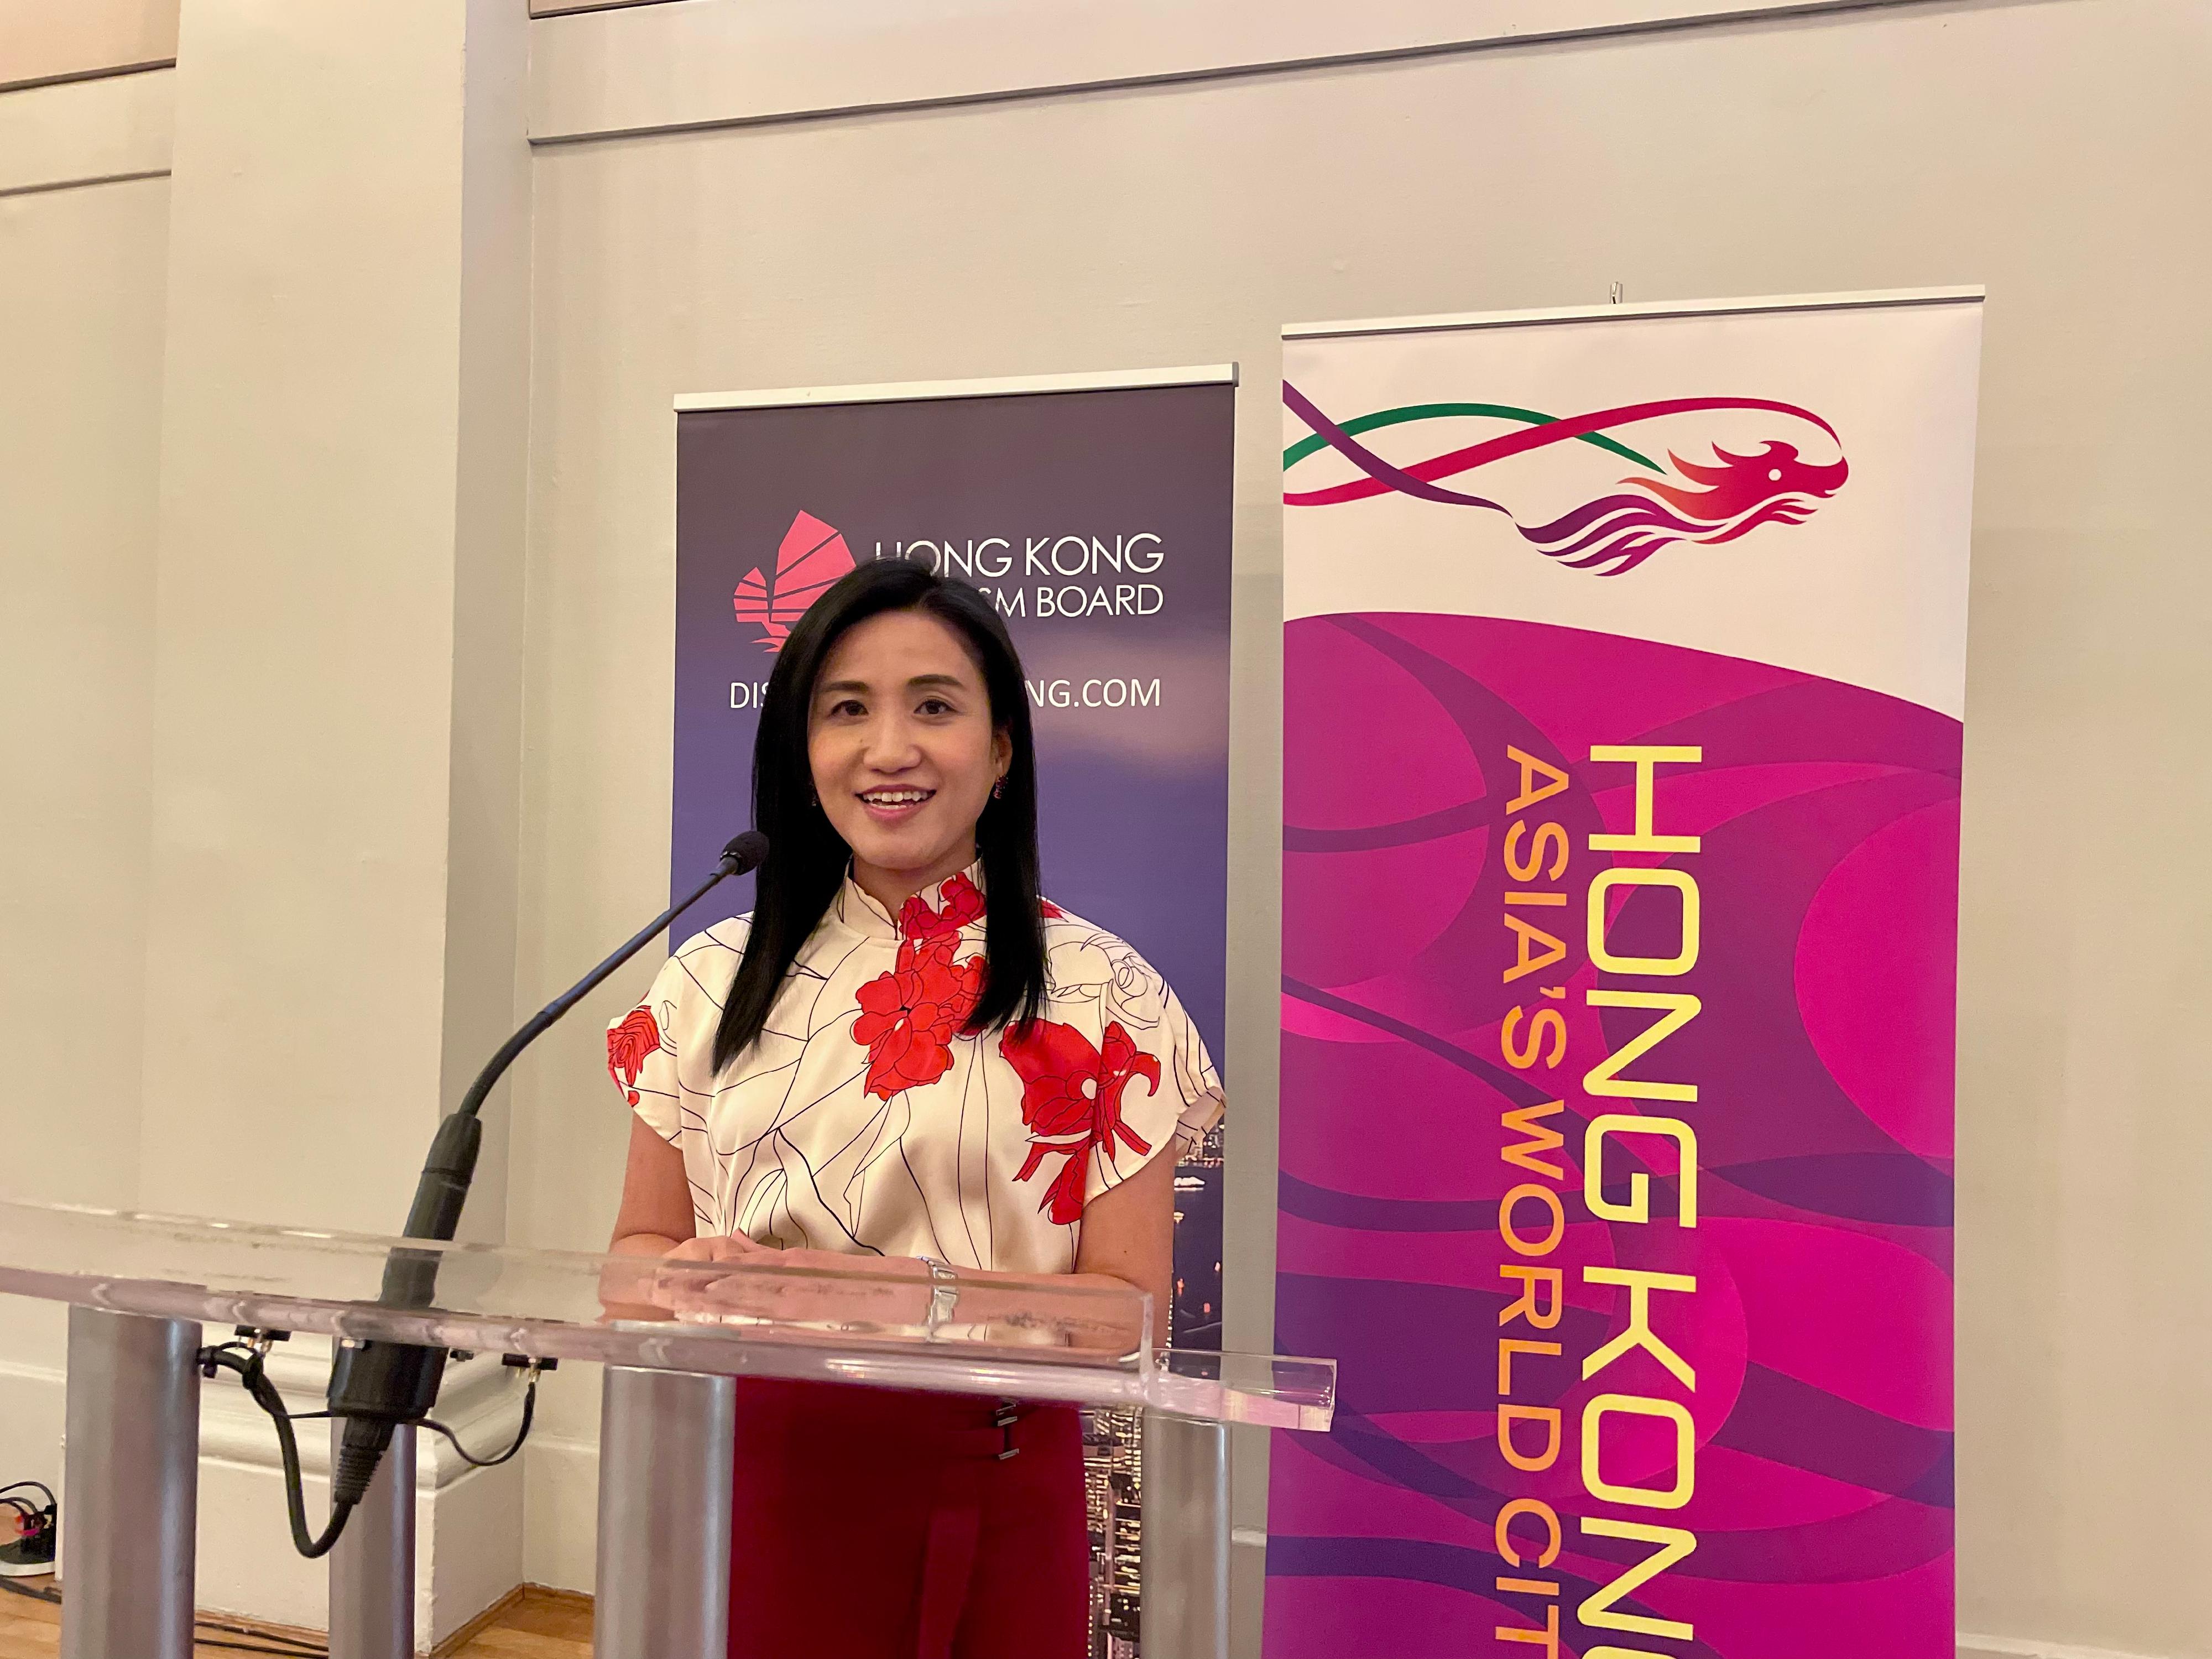 The Hong Kong Economic and Trade Office, Toronto (Toronto ETO) and the Hong Kong Tourism Board (Canada) held a joint Lunar New Year reception in Vancouver today (January 24, Vancouver time). Photo shows the Director of Toronto ETO, Ms Emily Mo, delivering her welcoming remarks.